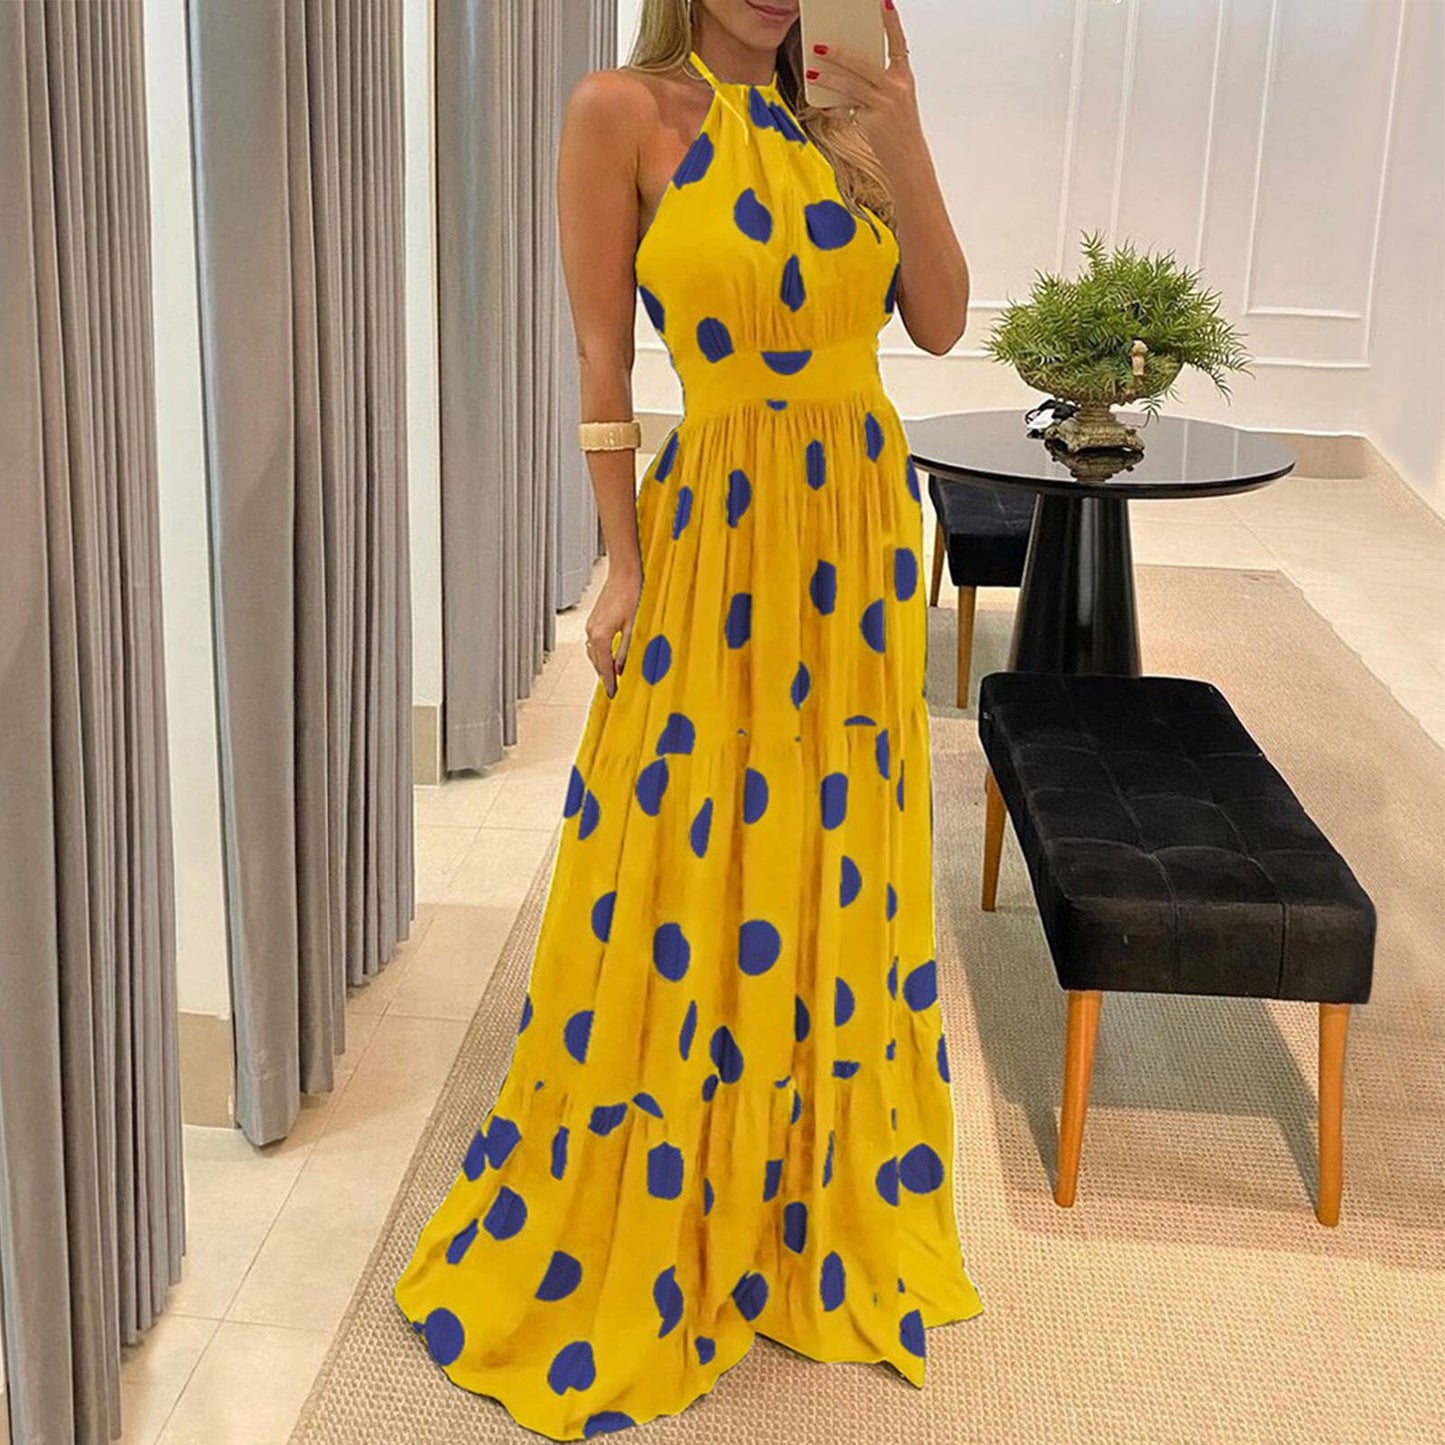 Summer Long Dress Polka Dot Casual Dresses Black Sexy Halter Strapless New - Yellow Sundress Vacation Clothes For Women